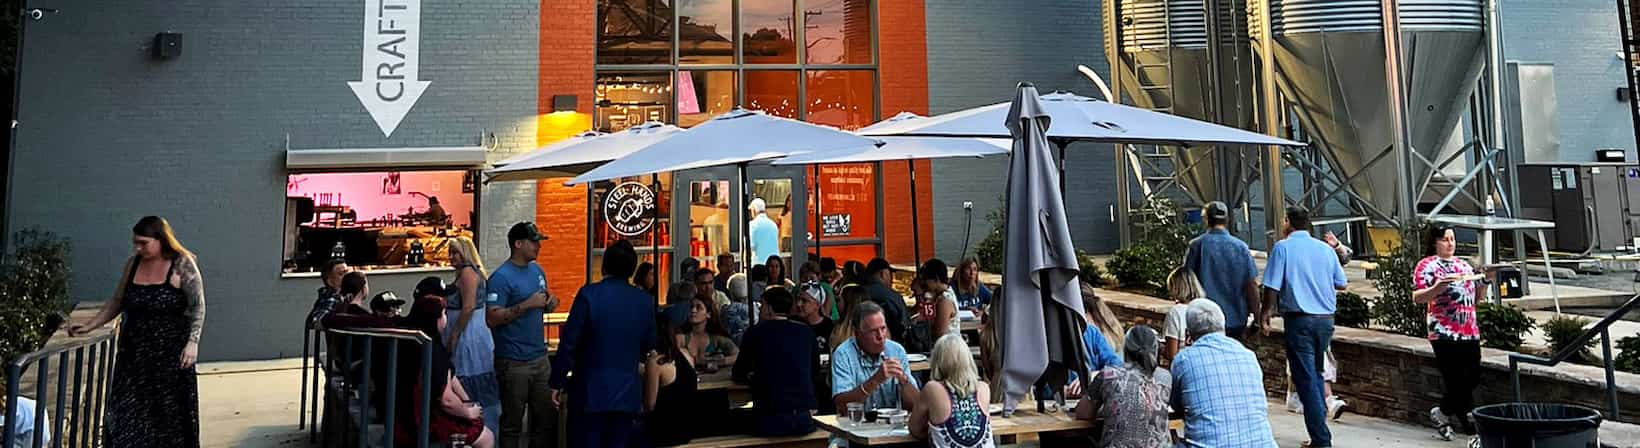 Steel Hands Brewing patio filled with people